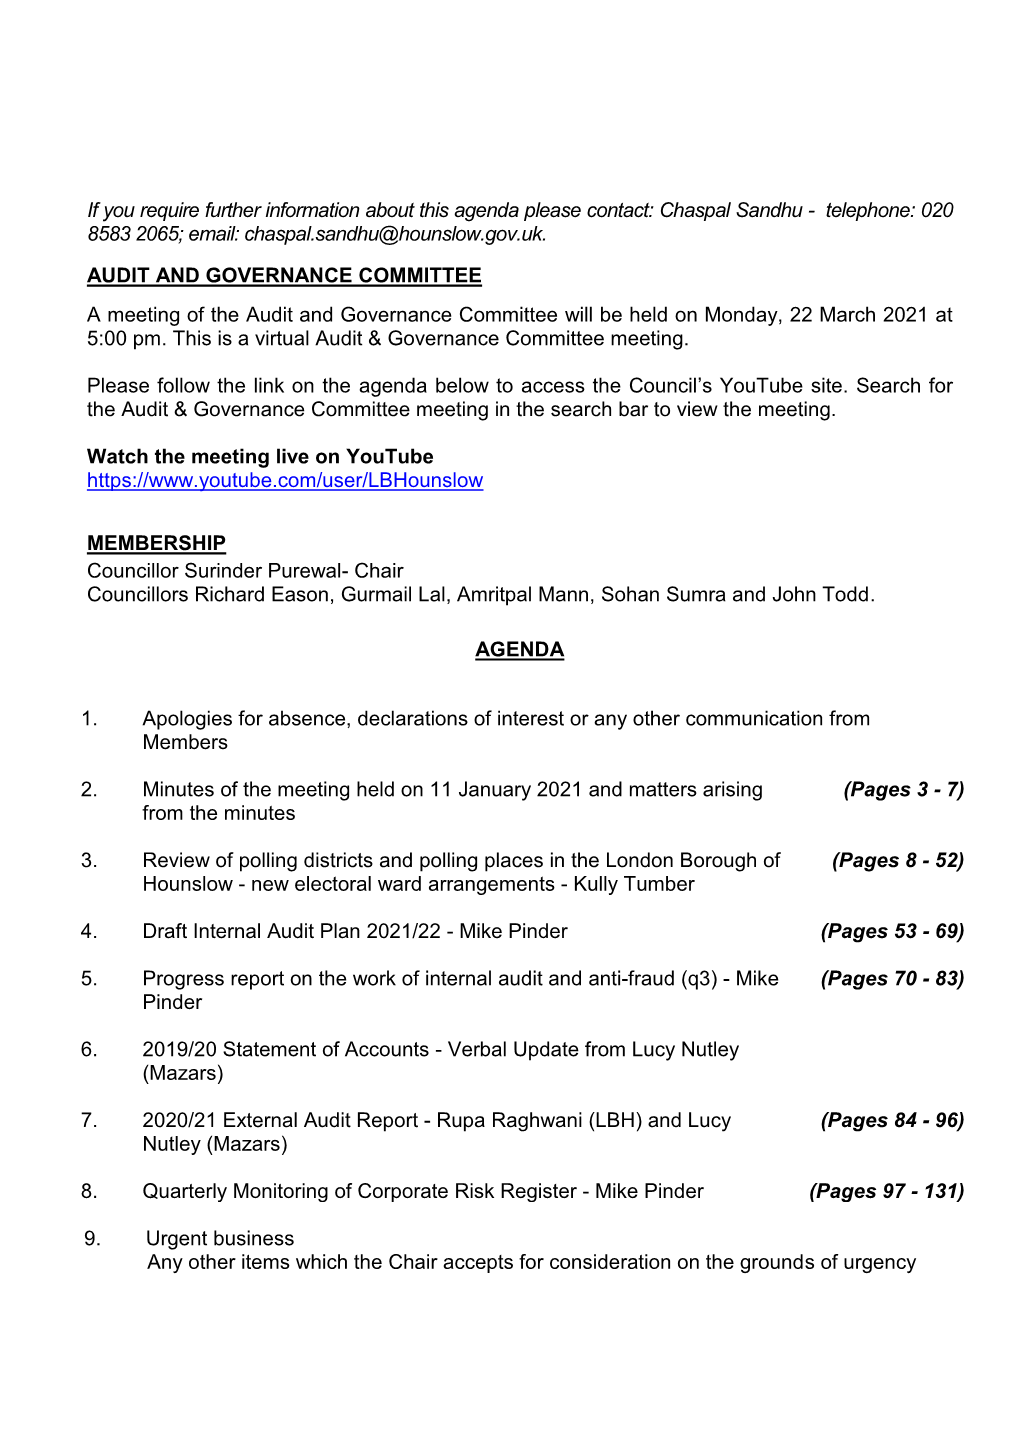 (Public Pack)Agenda Document for Audit and Governance Committee